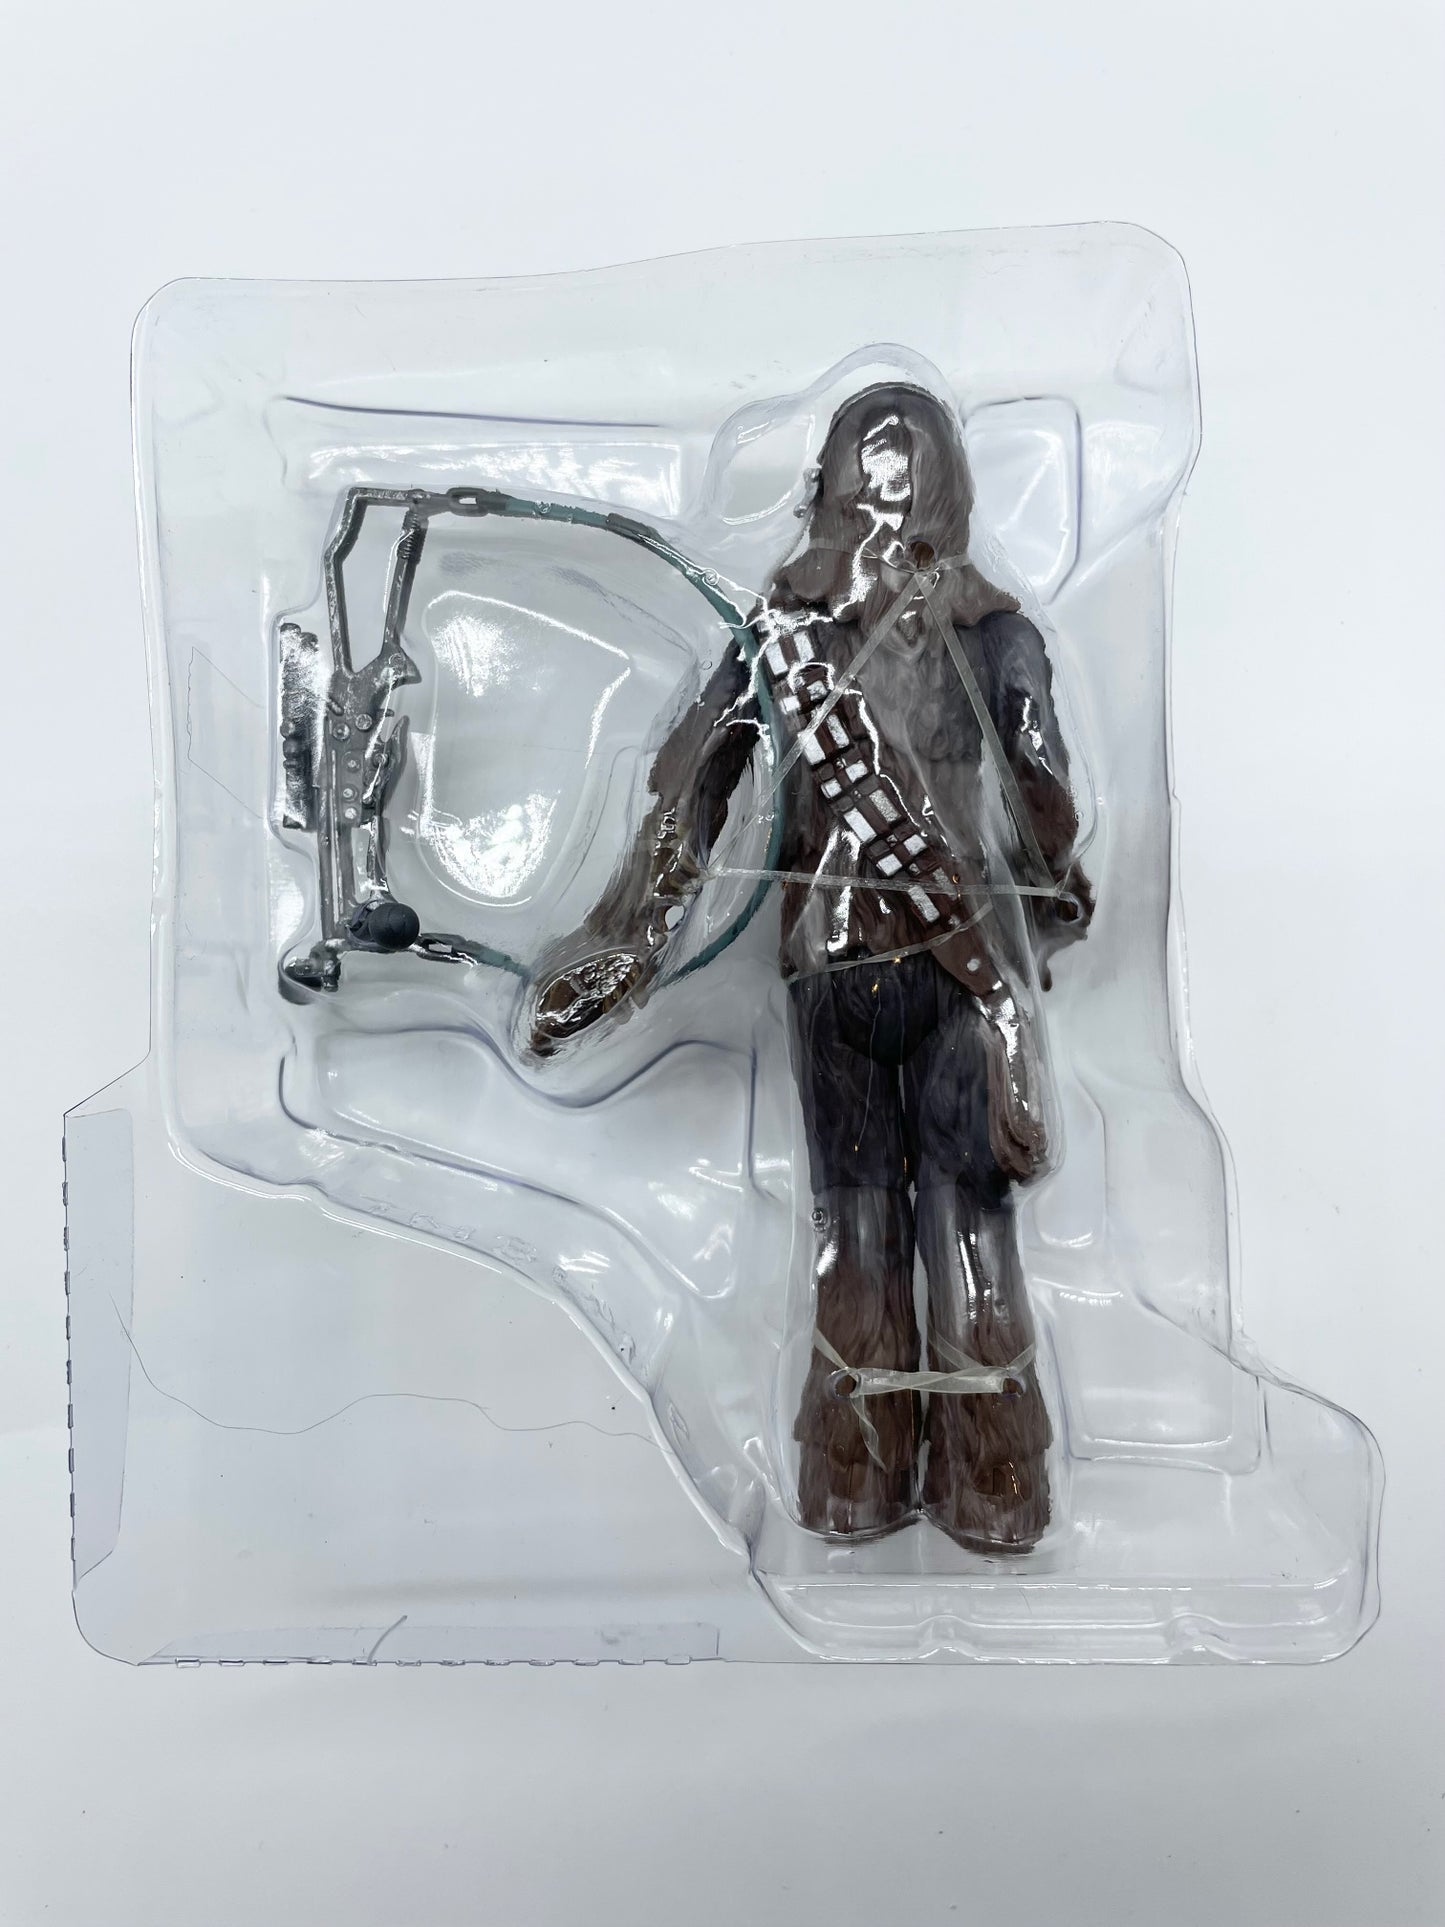 Legacy Collection Chewbacca BD31 Action Figure, Hasbro 2010